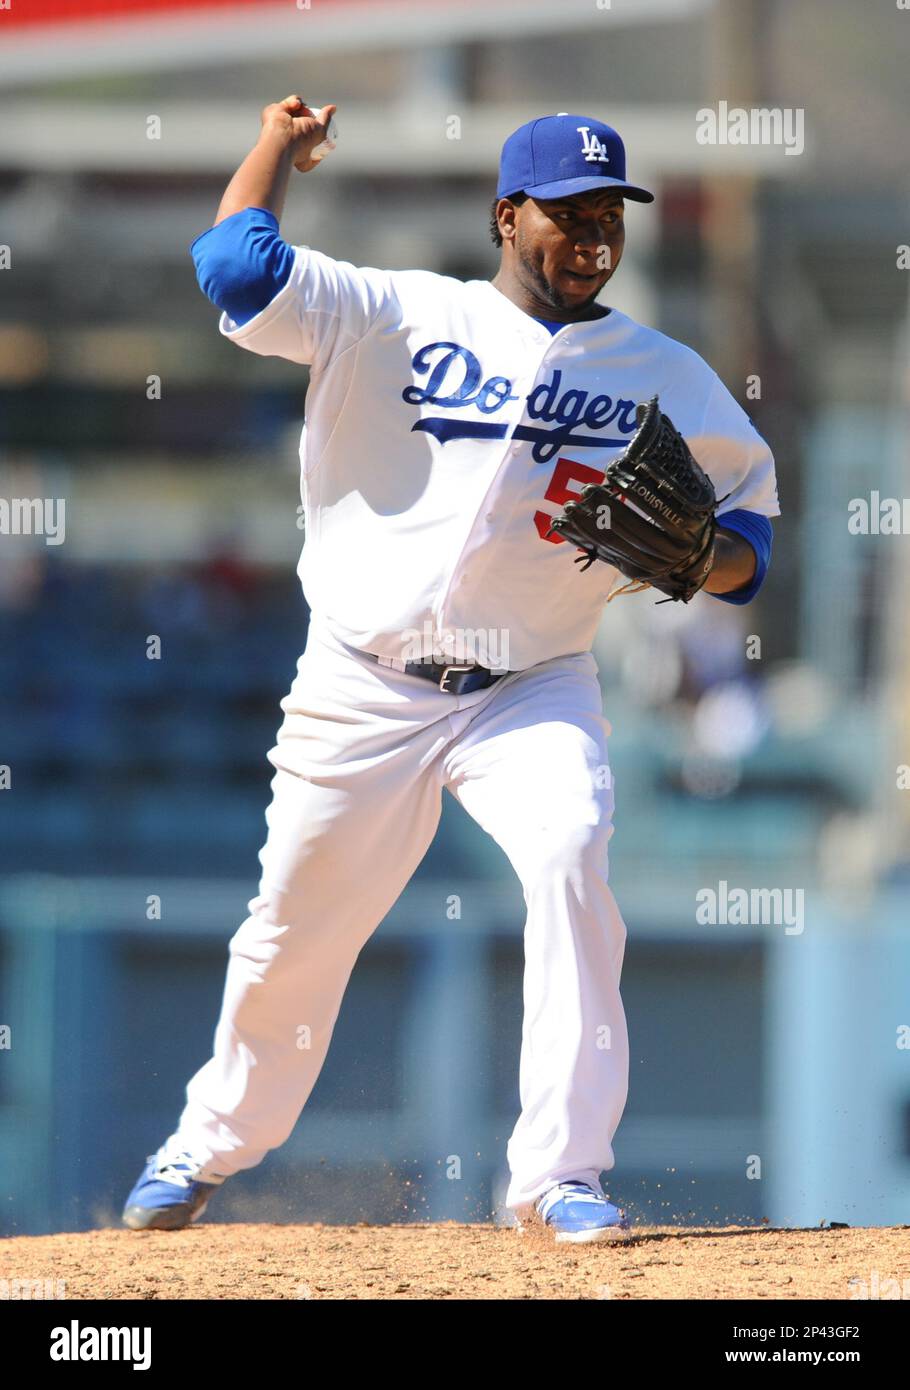 03 September 2014: Los Angeles Dodgers Pitcher Pedro Baez (52) [4014]  during a Major League Baseball game between the Washington Nationals and  the Los Angeles Dodgers at Dodger Stadium in Los Angeles